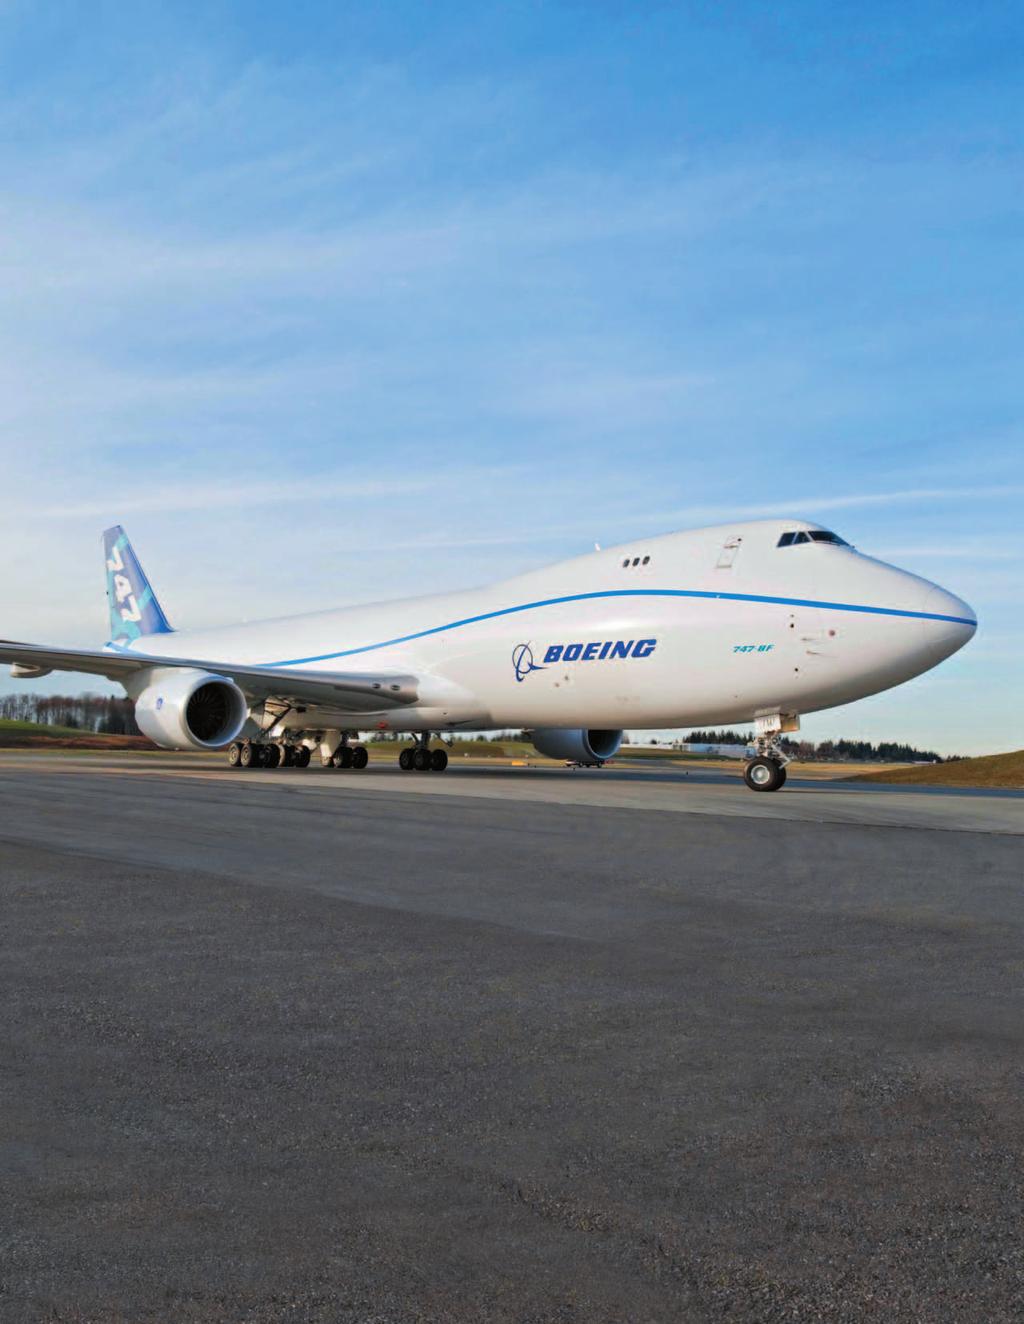 The 747 8 offers operators increased capacity while taking